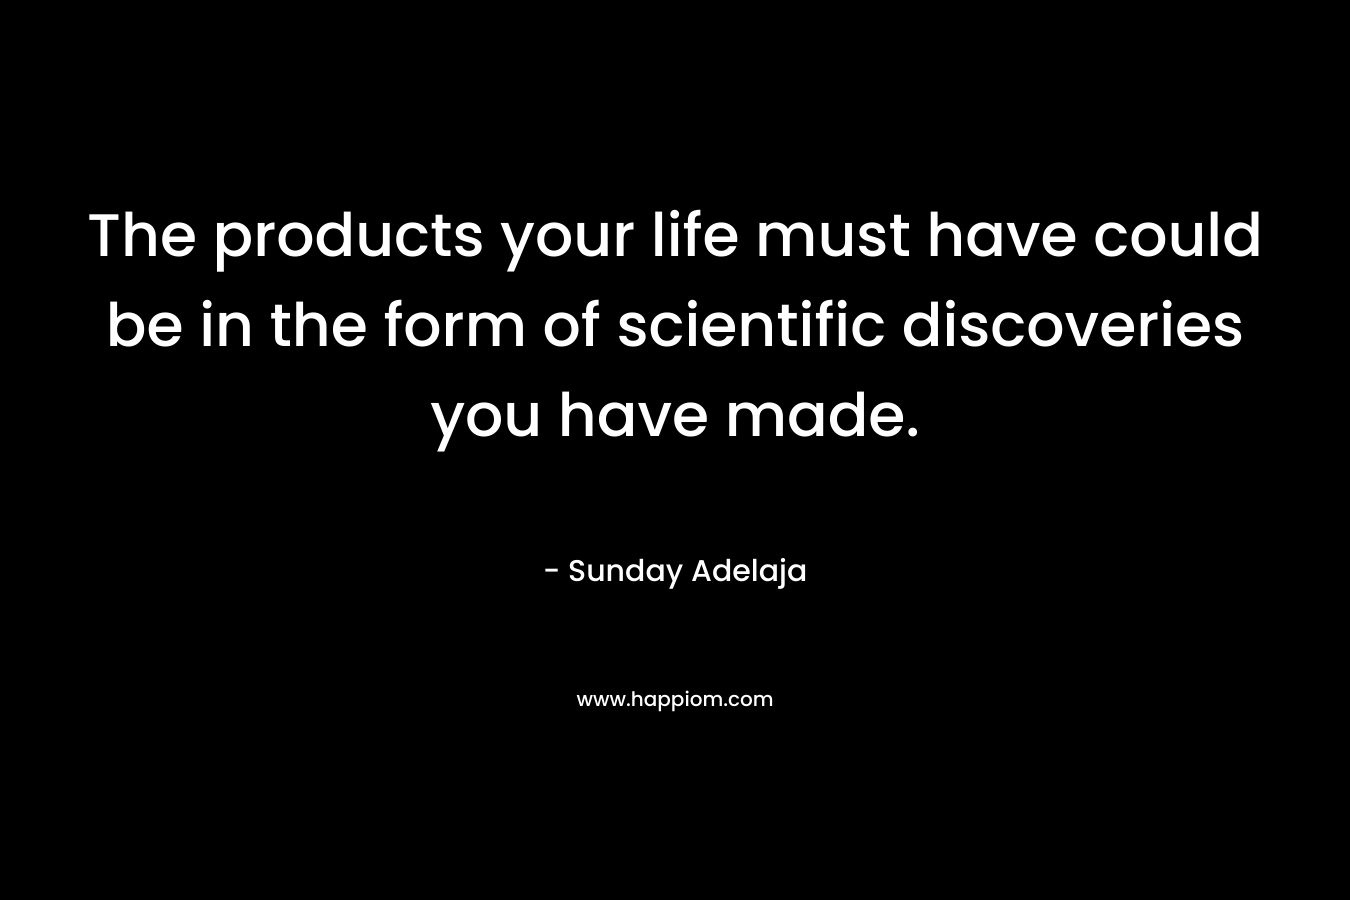 The products your life must have could be in the form of scientific discoveries you have made.